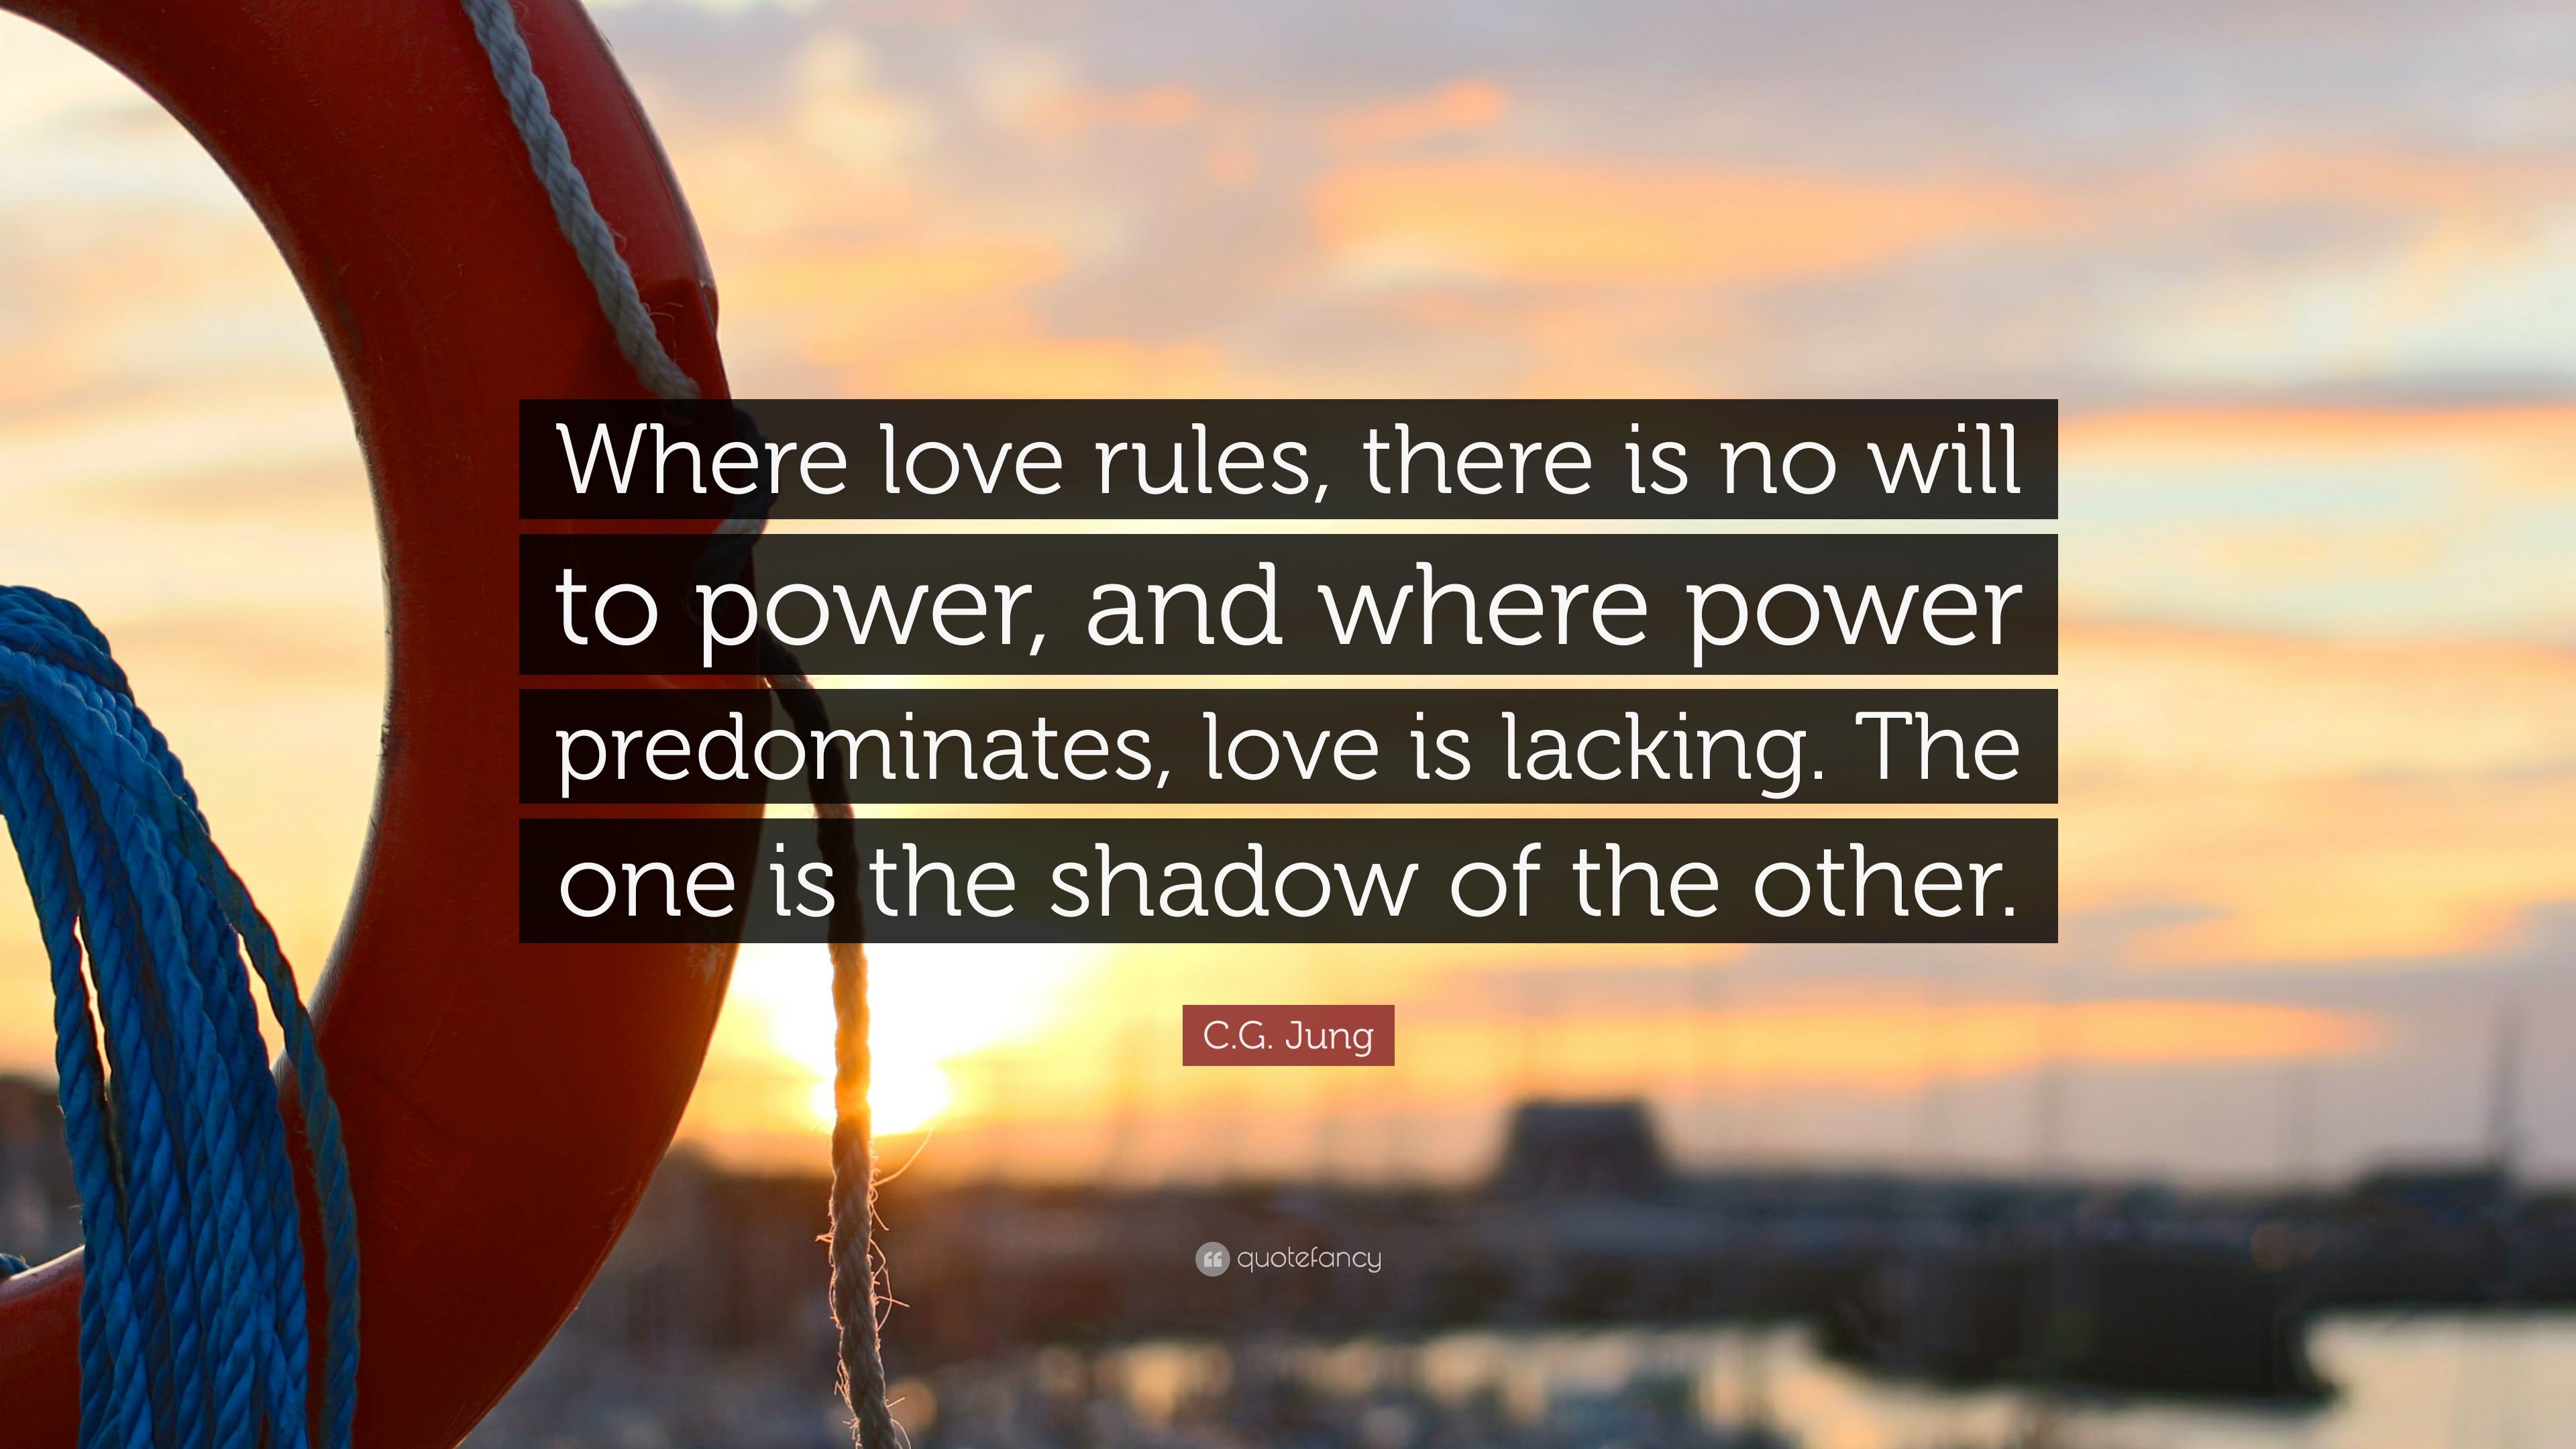 C.G. Jung Quote: “Where love rules, there is no will to power, and